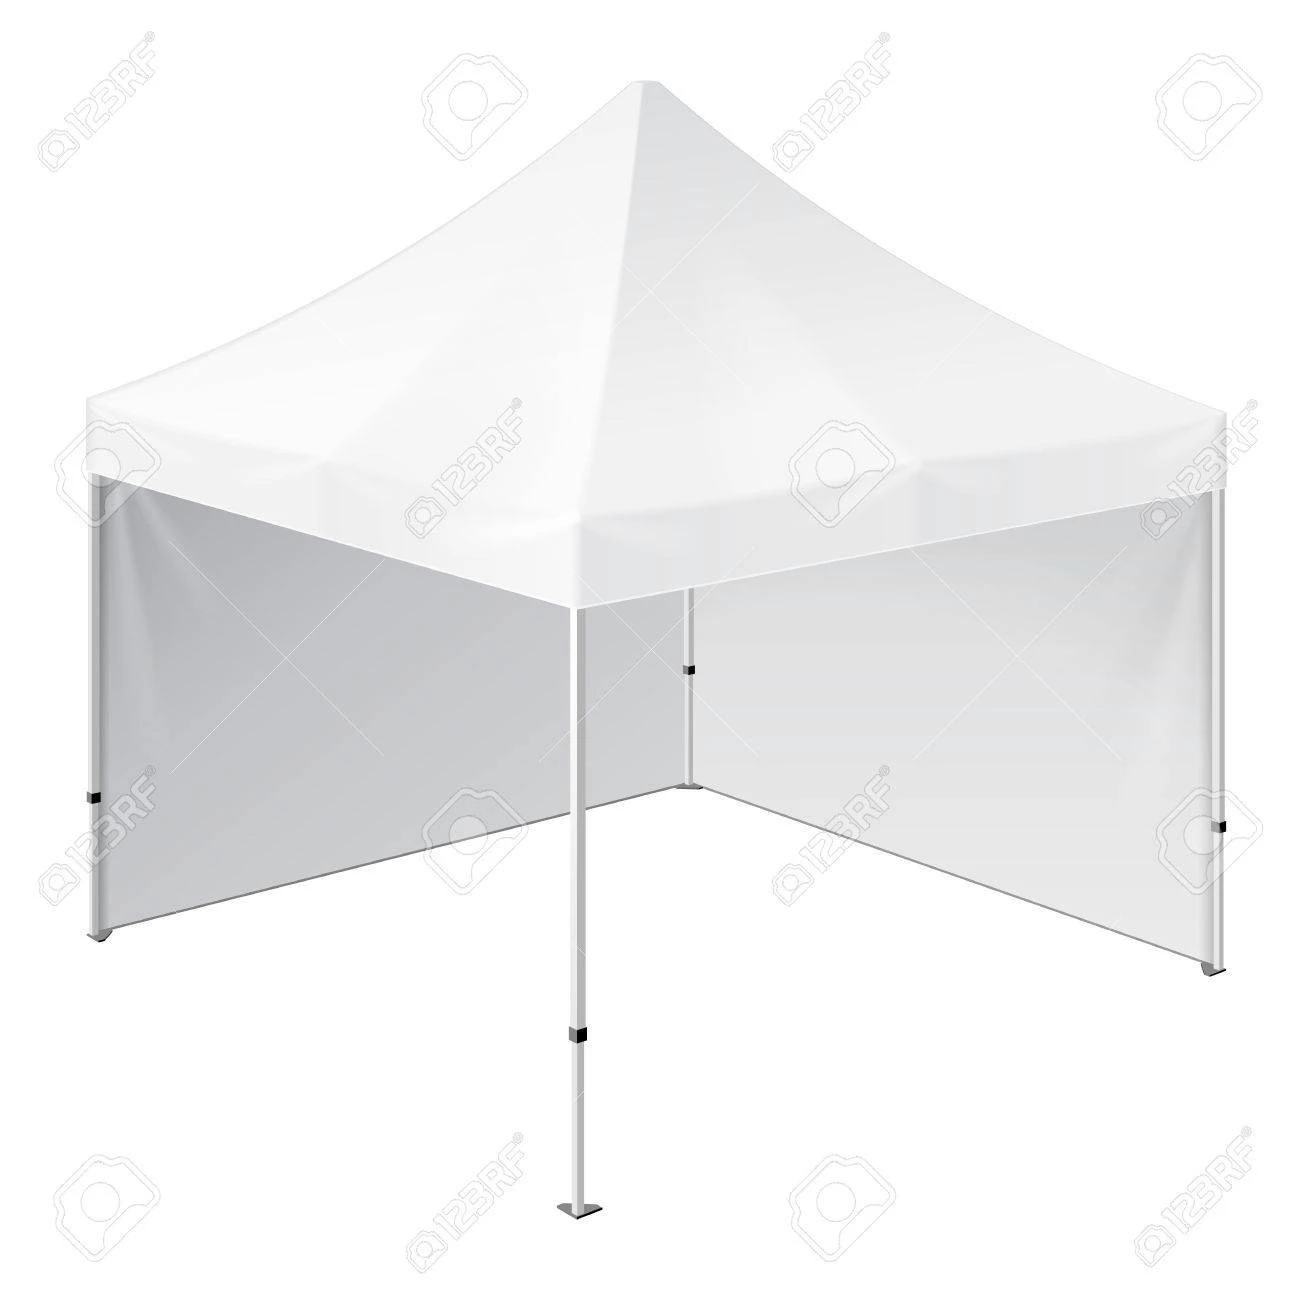 Easy Up Pop Up Tent Advertising Canopy Gazebo For Outdoor Trade Show